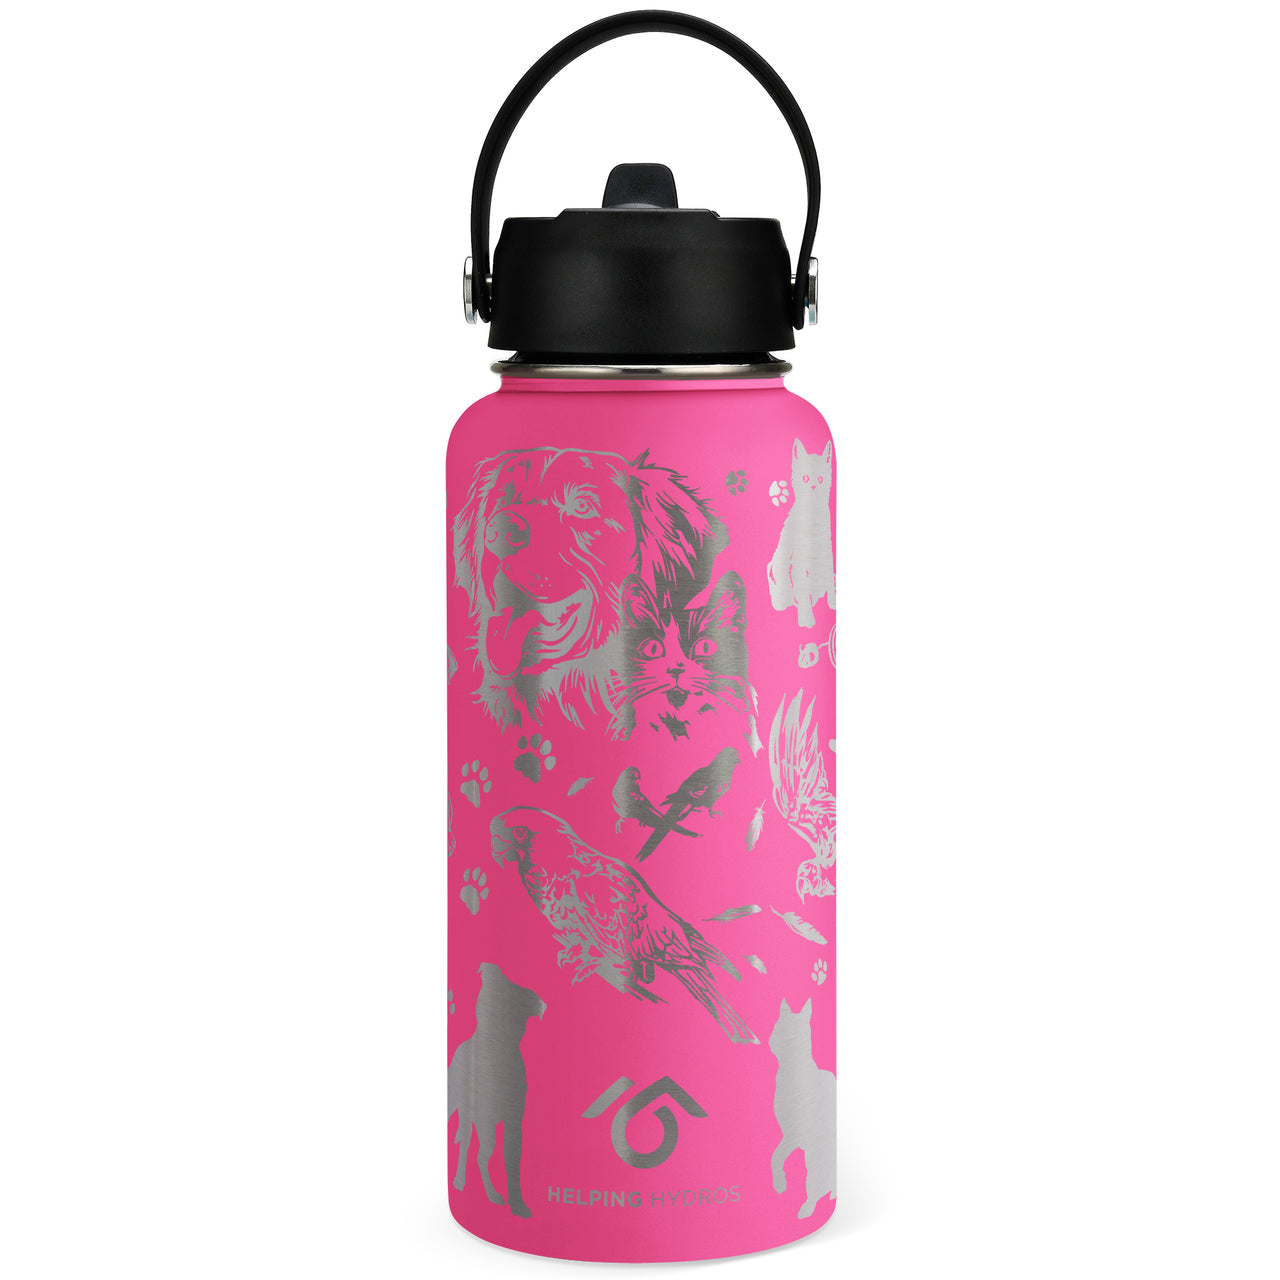 Animal Rescue Bottle - Support The Best Friends Animal Society